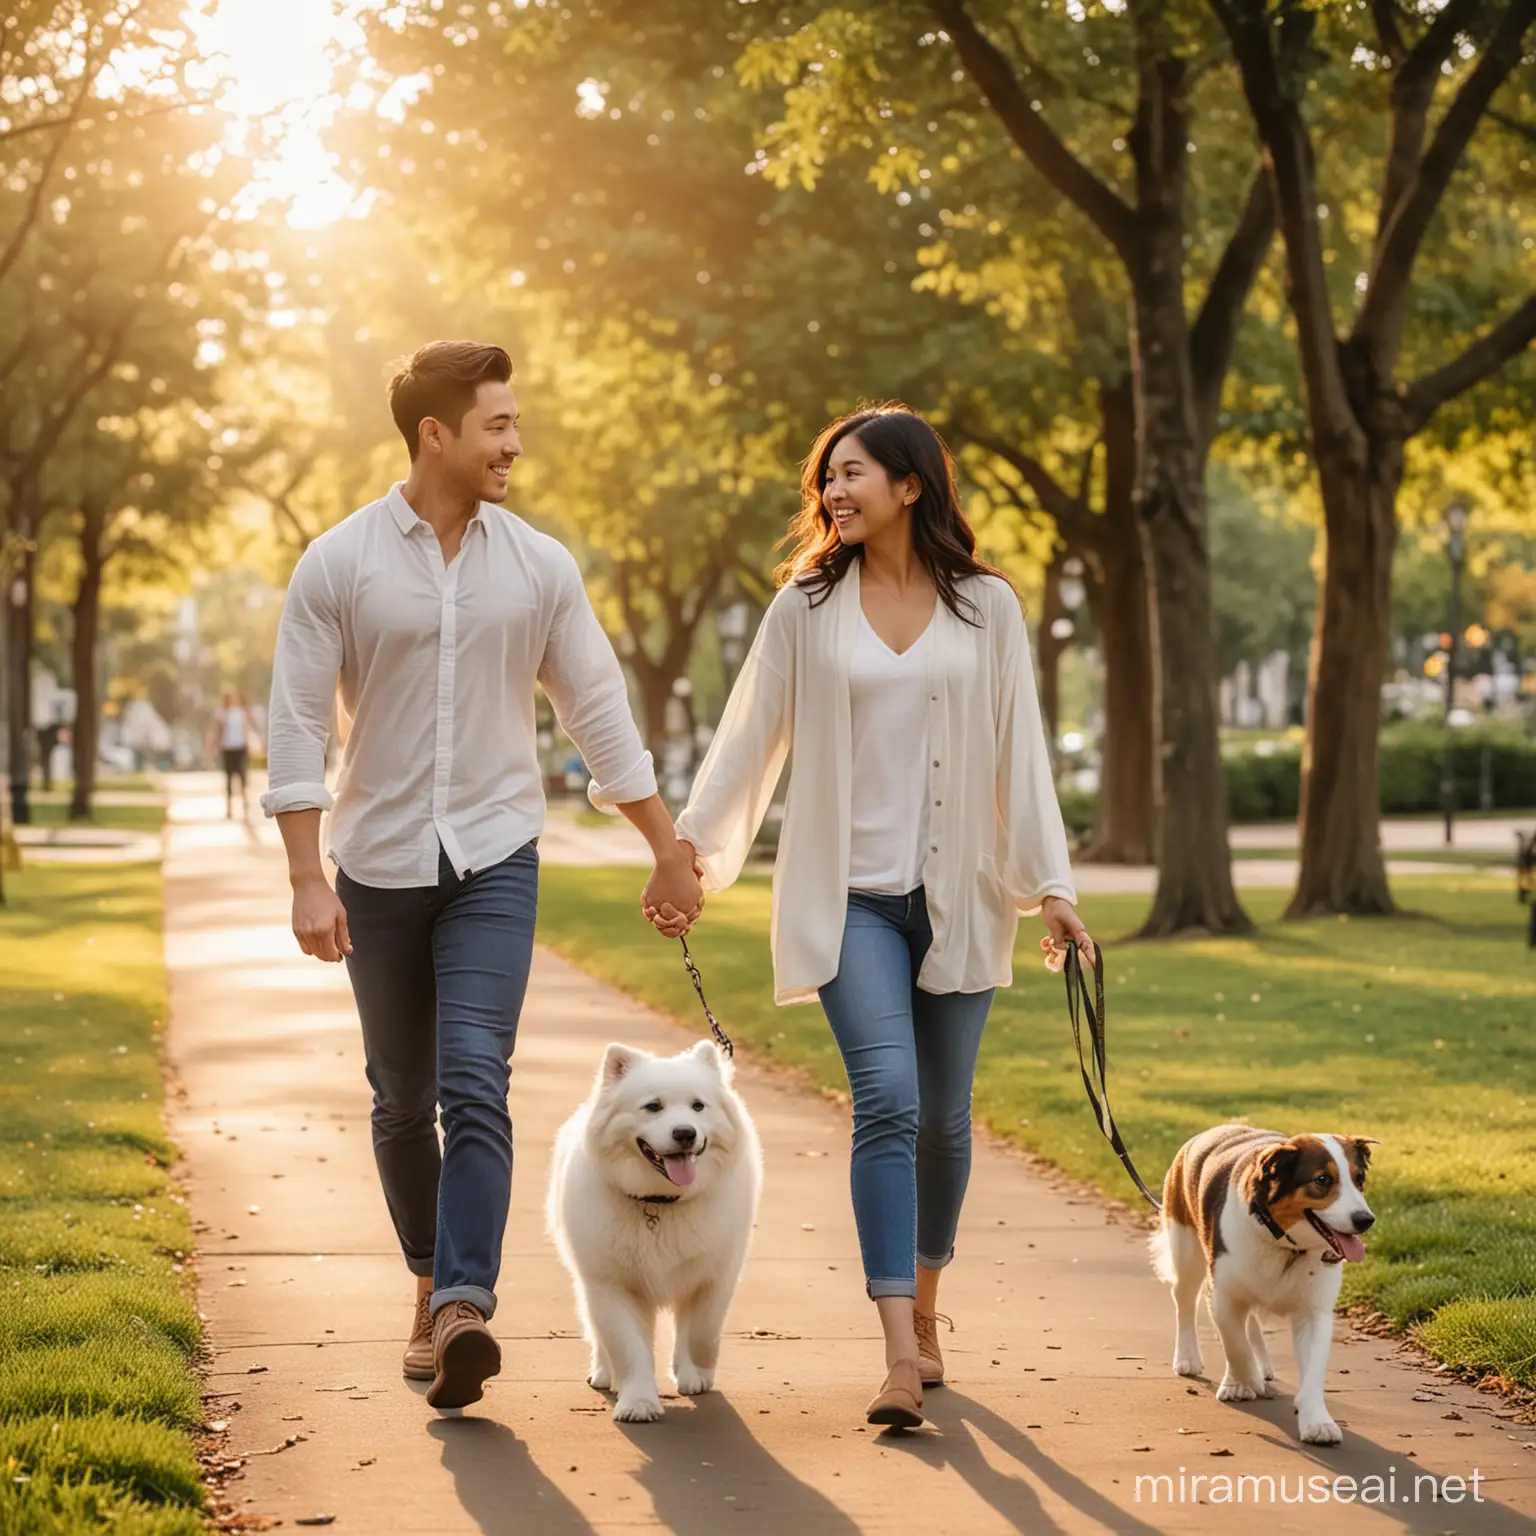 An attractive asian woman and her attractive white male fiance walking peacefully in the park holding hands as their dog walks beside them. They are both at peace and secure in themselves. They smile. The light is golden hour. peaceful. calm. resilient.
